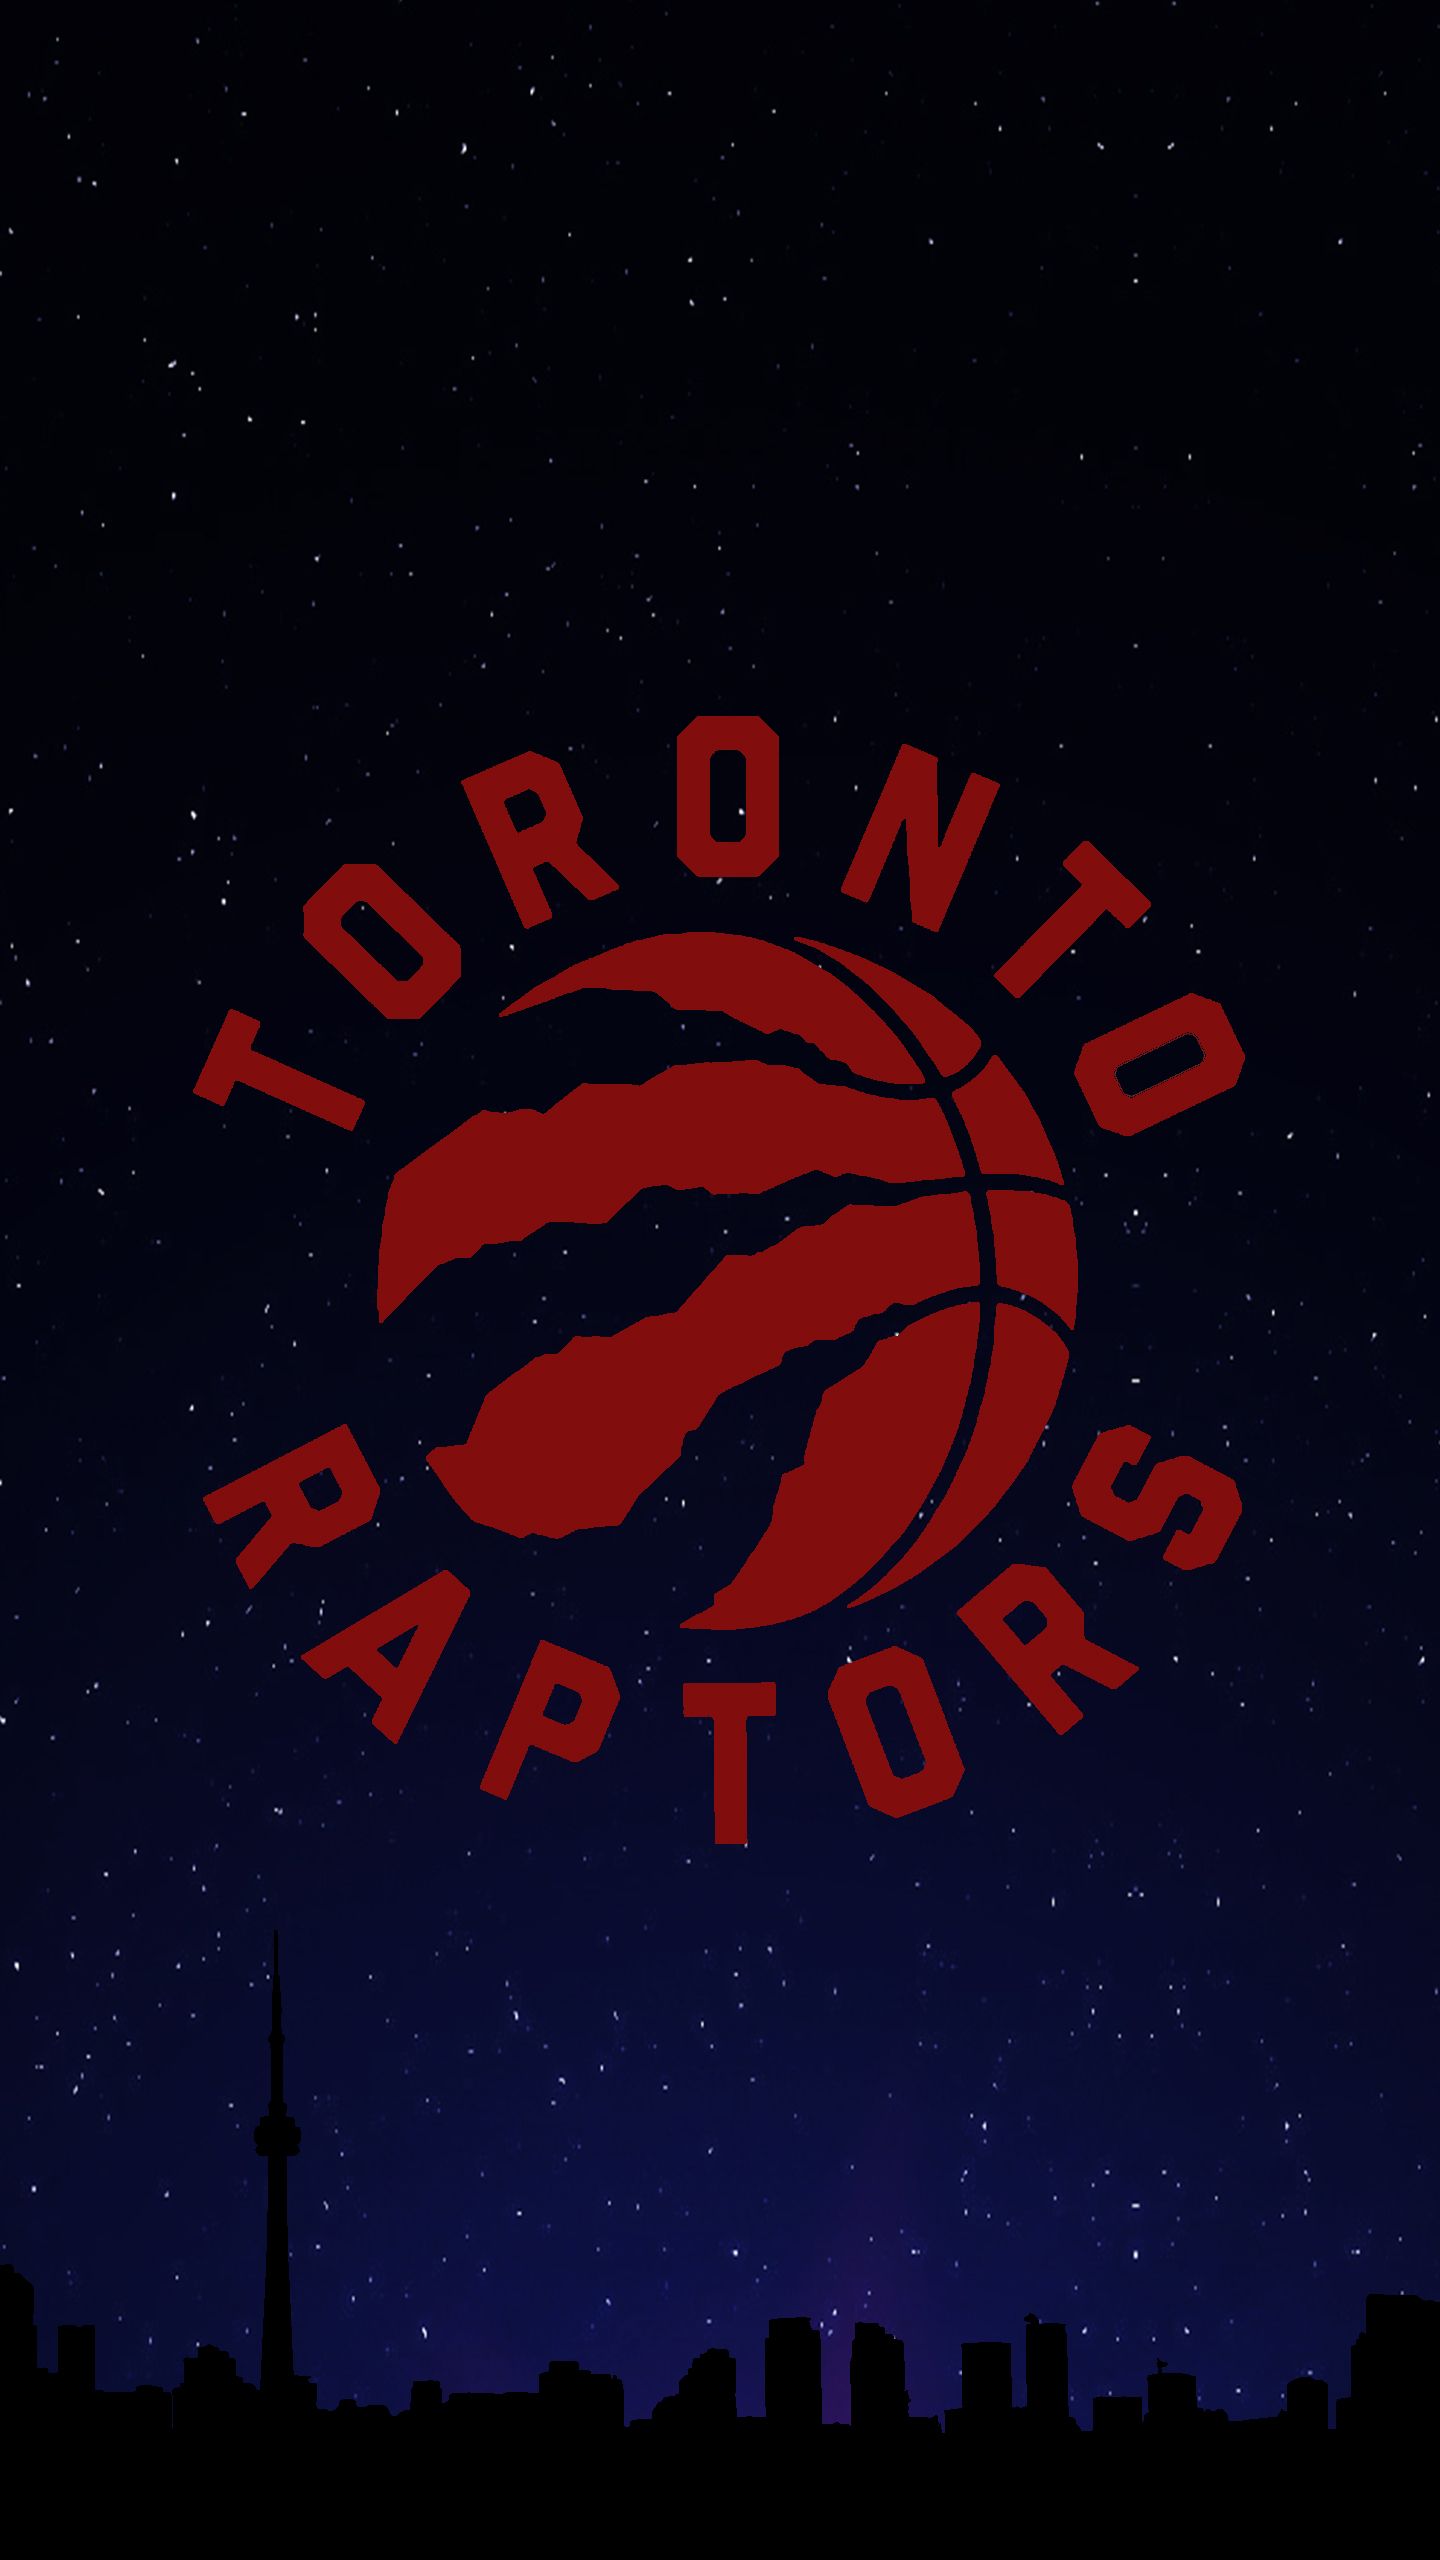 If you guys use a raptors wallpaper on your phone drop em below. This is the one I use. Just looking for new ones